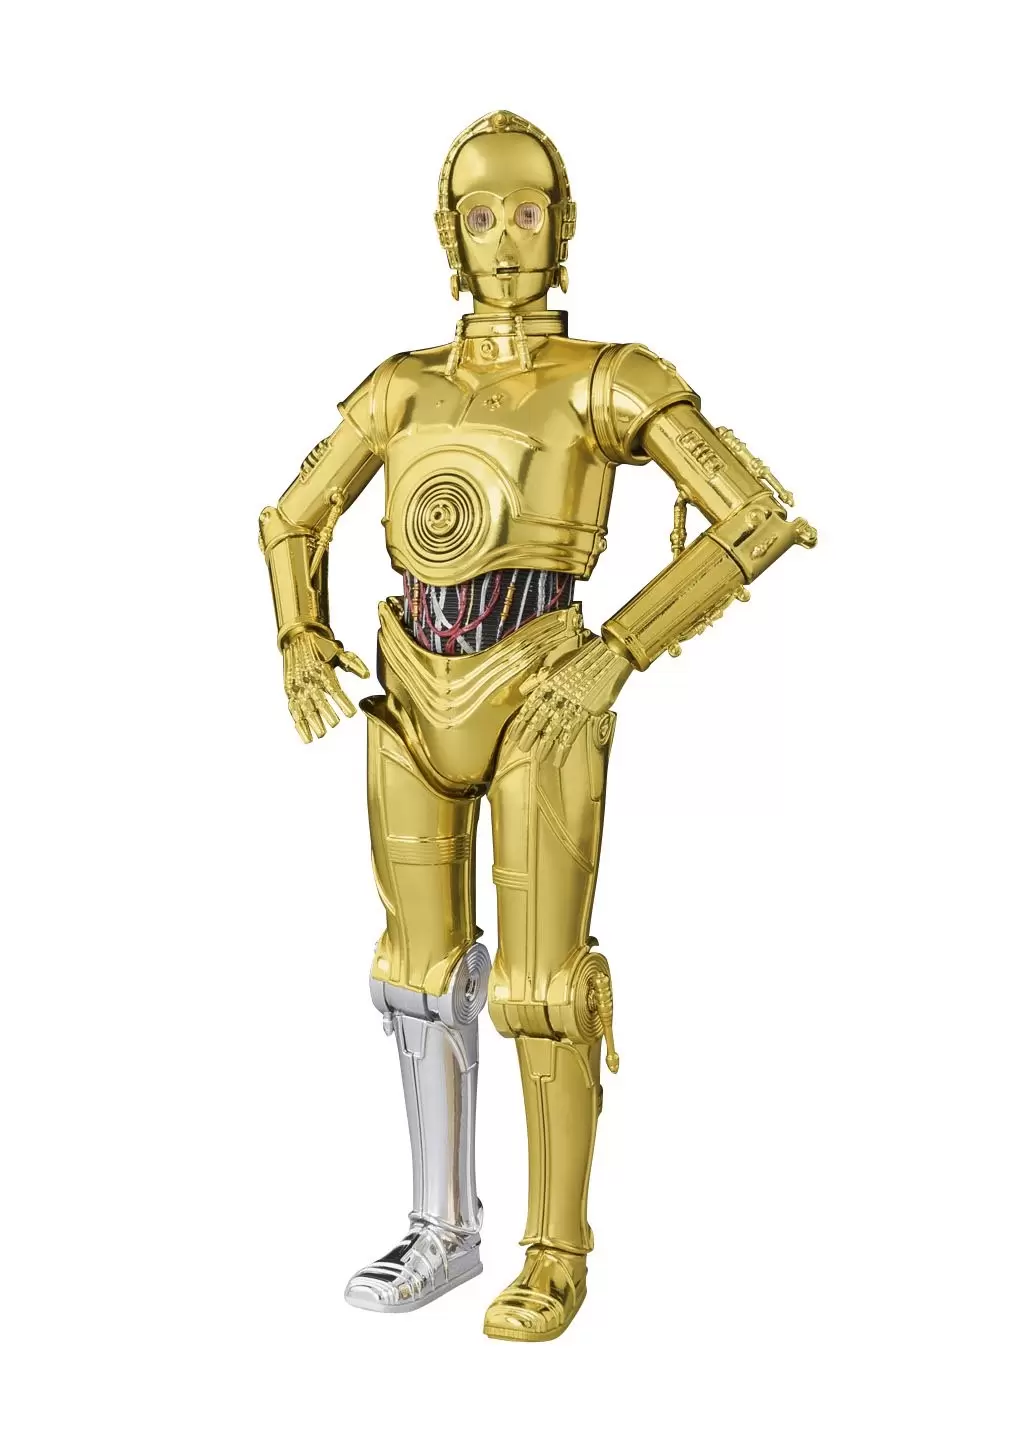 S.H. Figuarts Star Wars - A New Hope - C-3PO